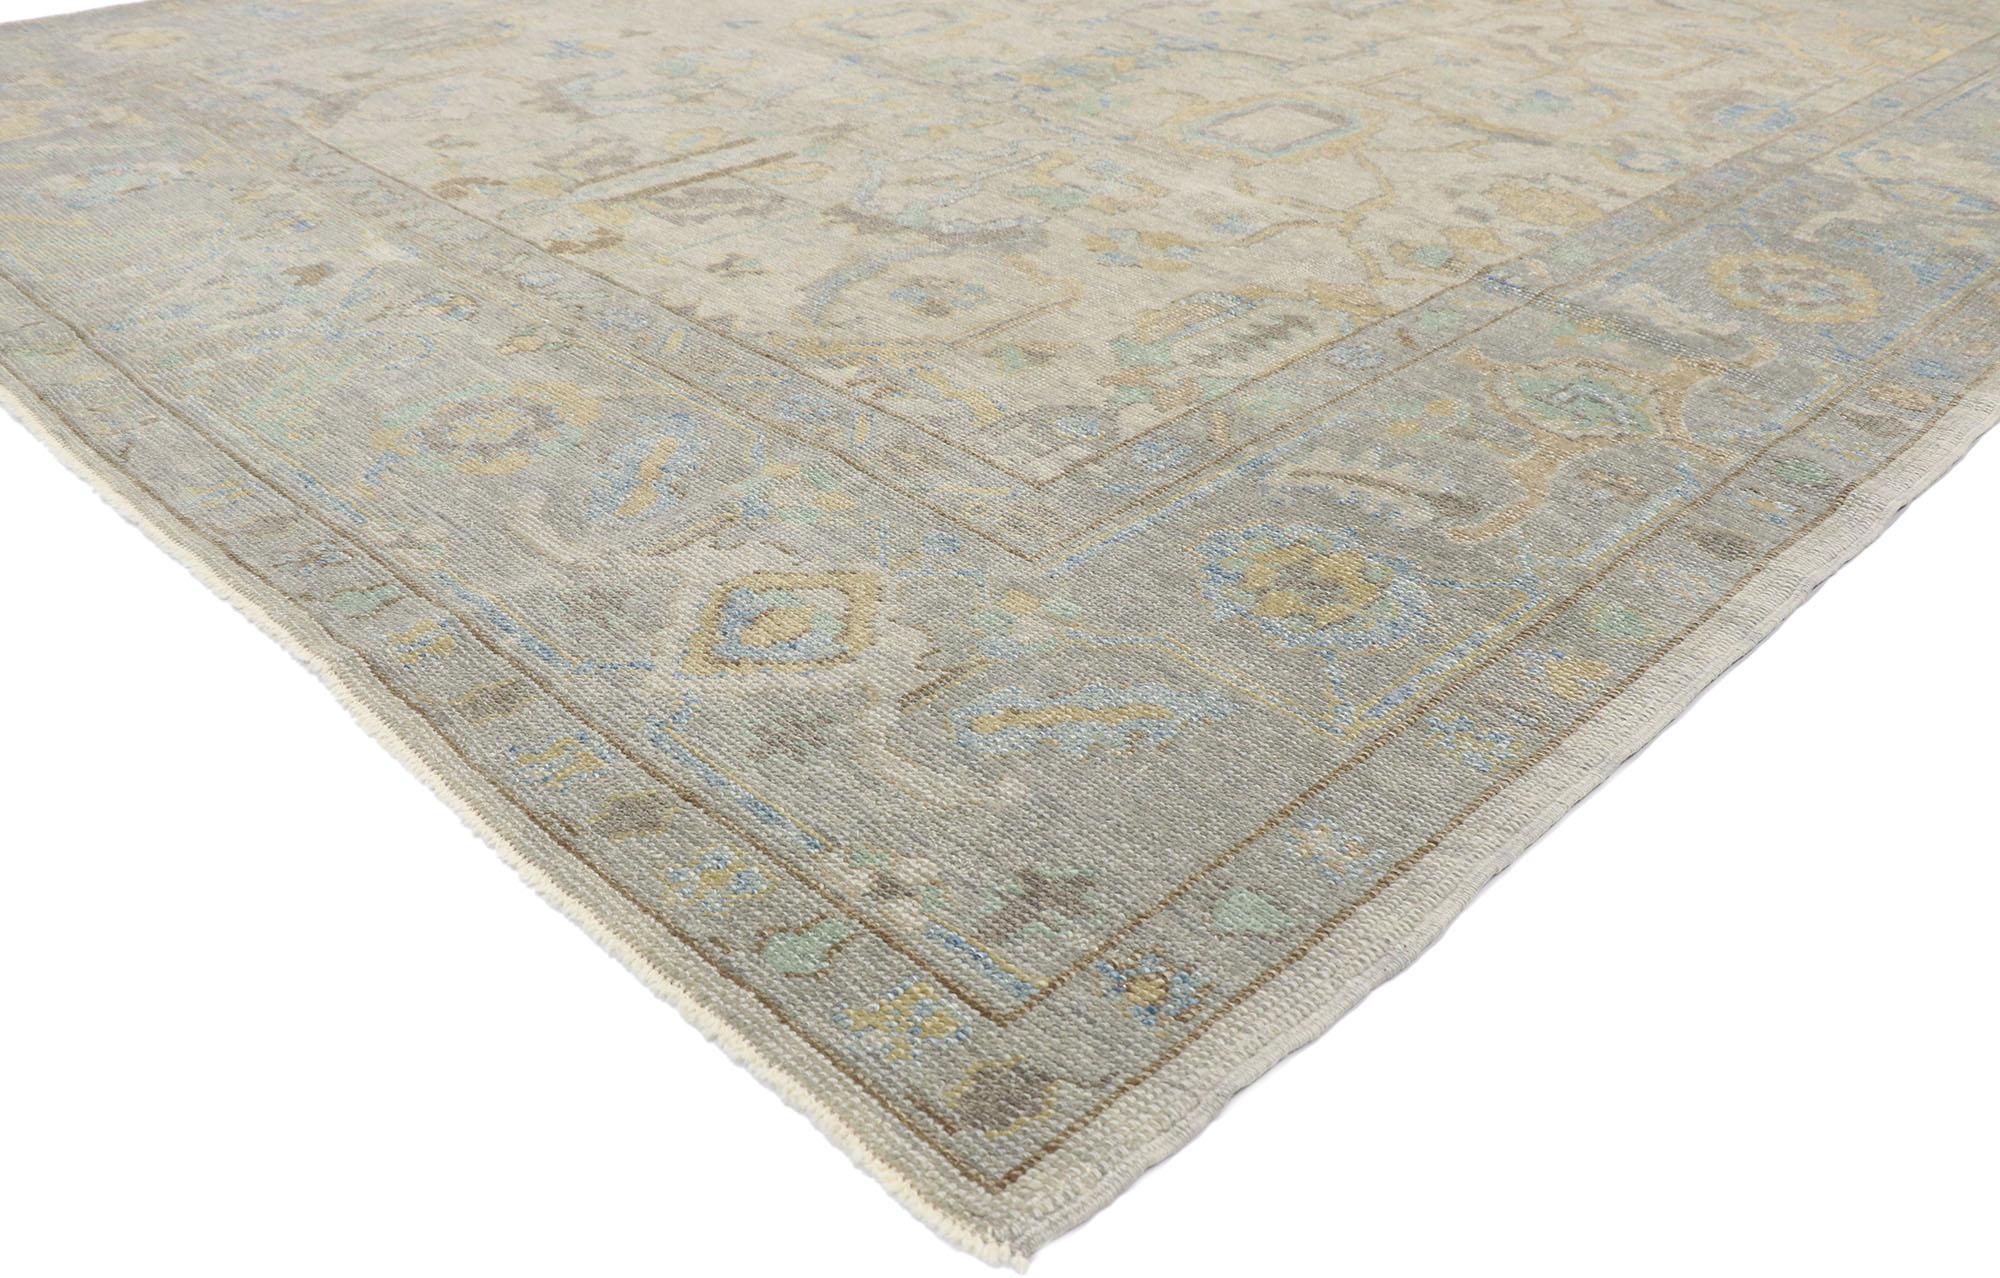 53493, new contemporary Turkish Oushak rug with transitional modern style 09'01 x 11'11. This hand-knotted wool contemporary Turkish Oushak rug features an all-over botanical pattern spread across an abrashed gray field. An array of botanical motifs